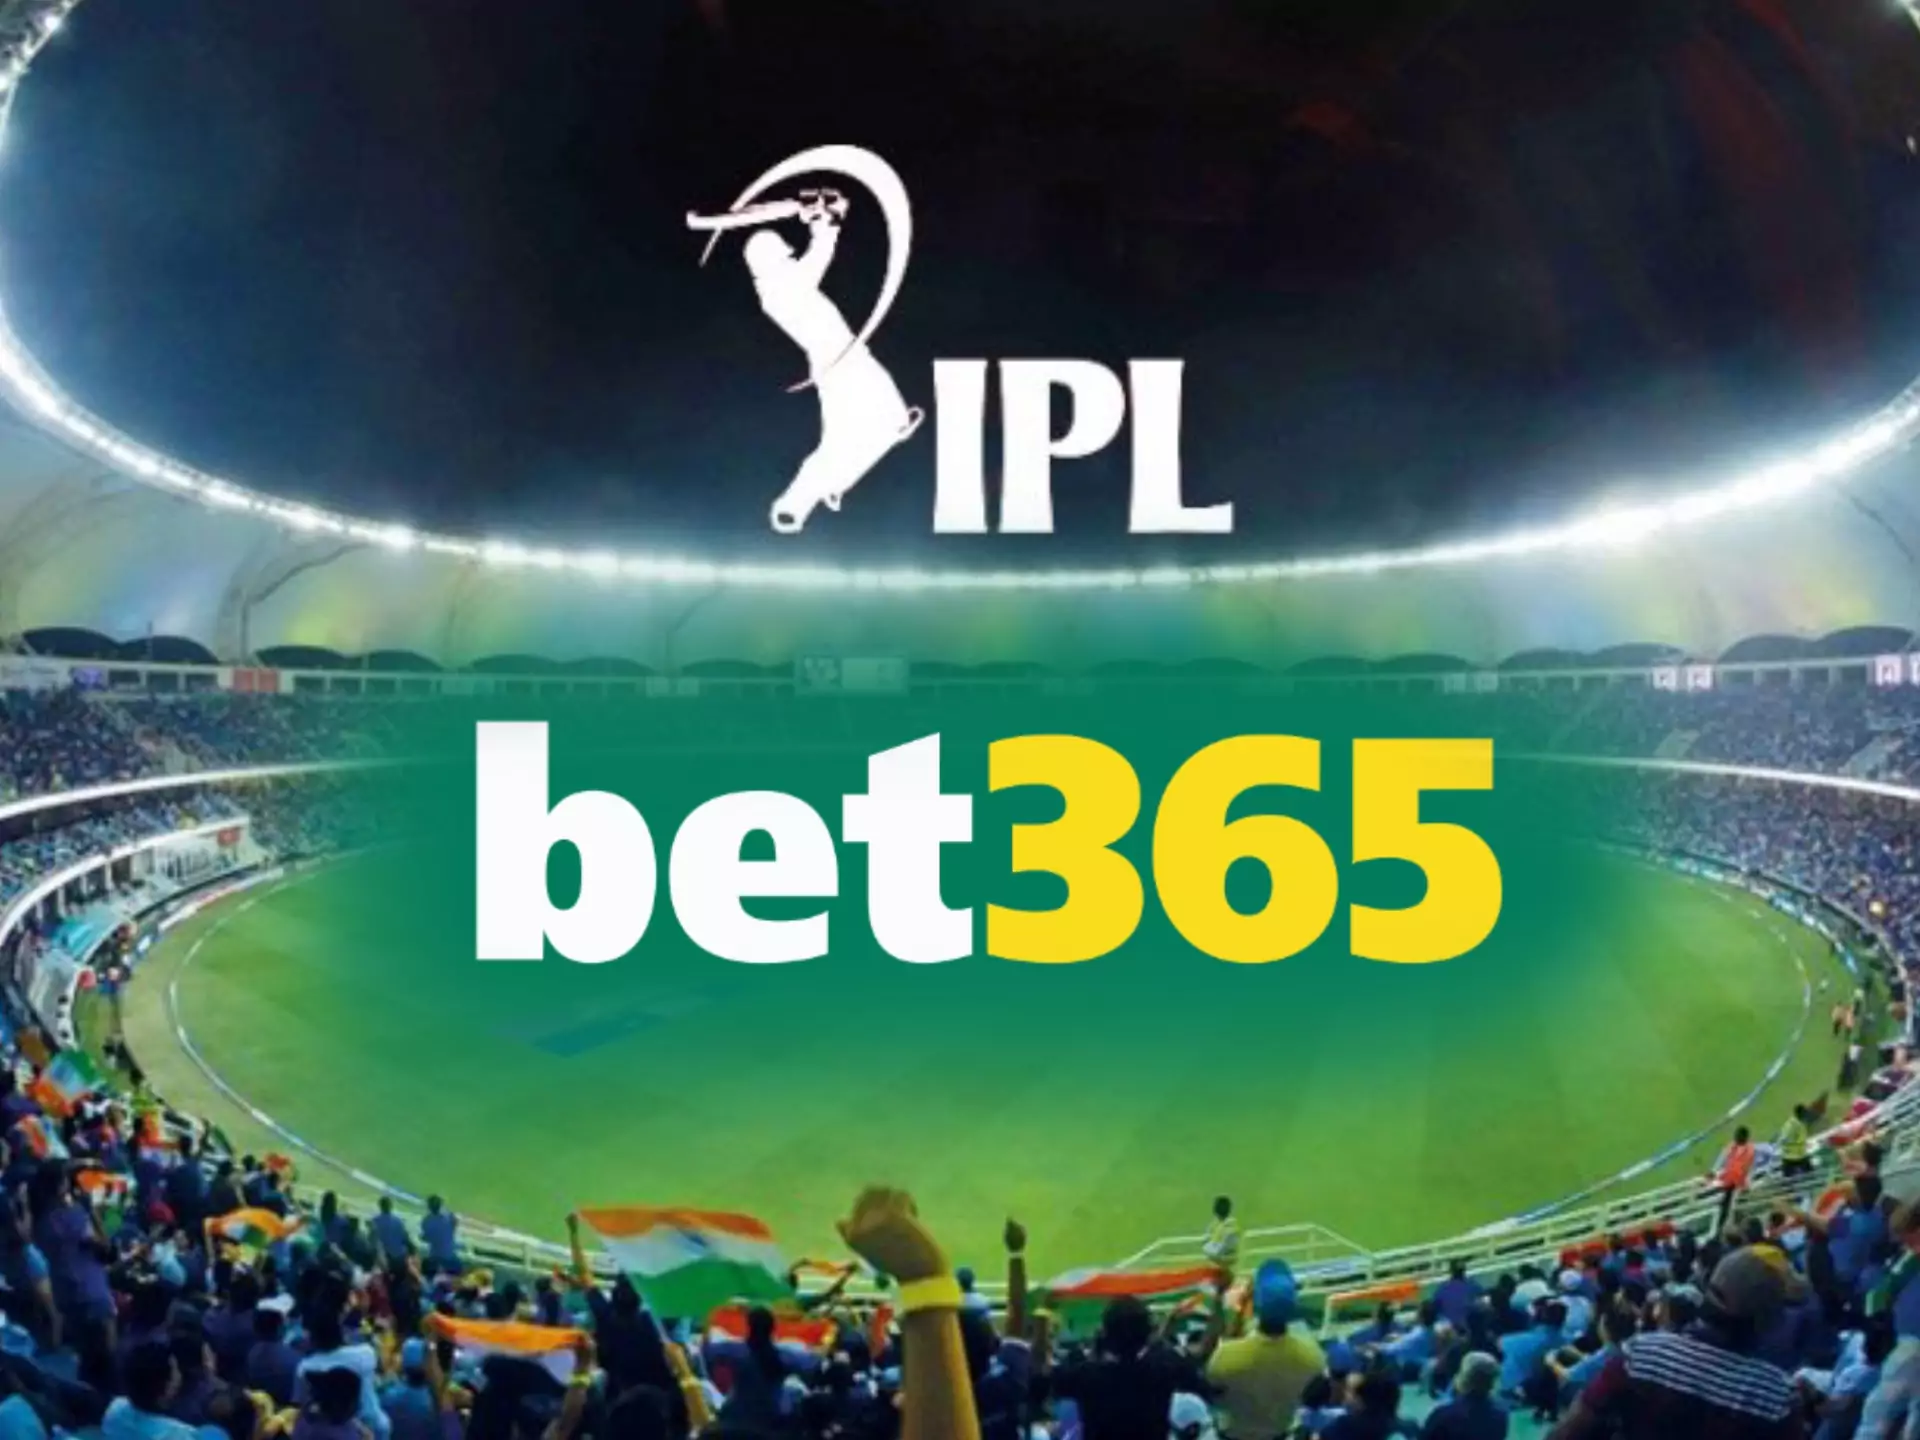 Receive bet365 welcome bonus and spend it on IPL bets.